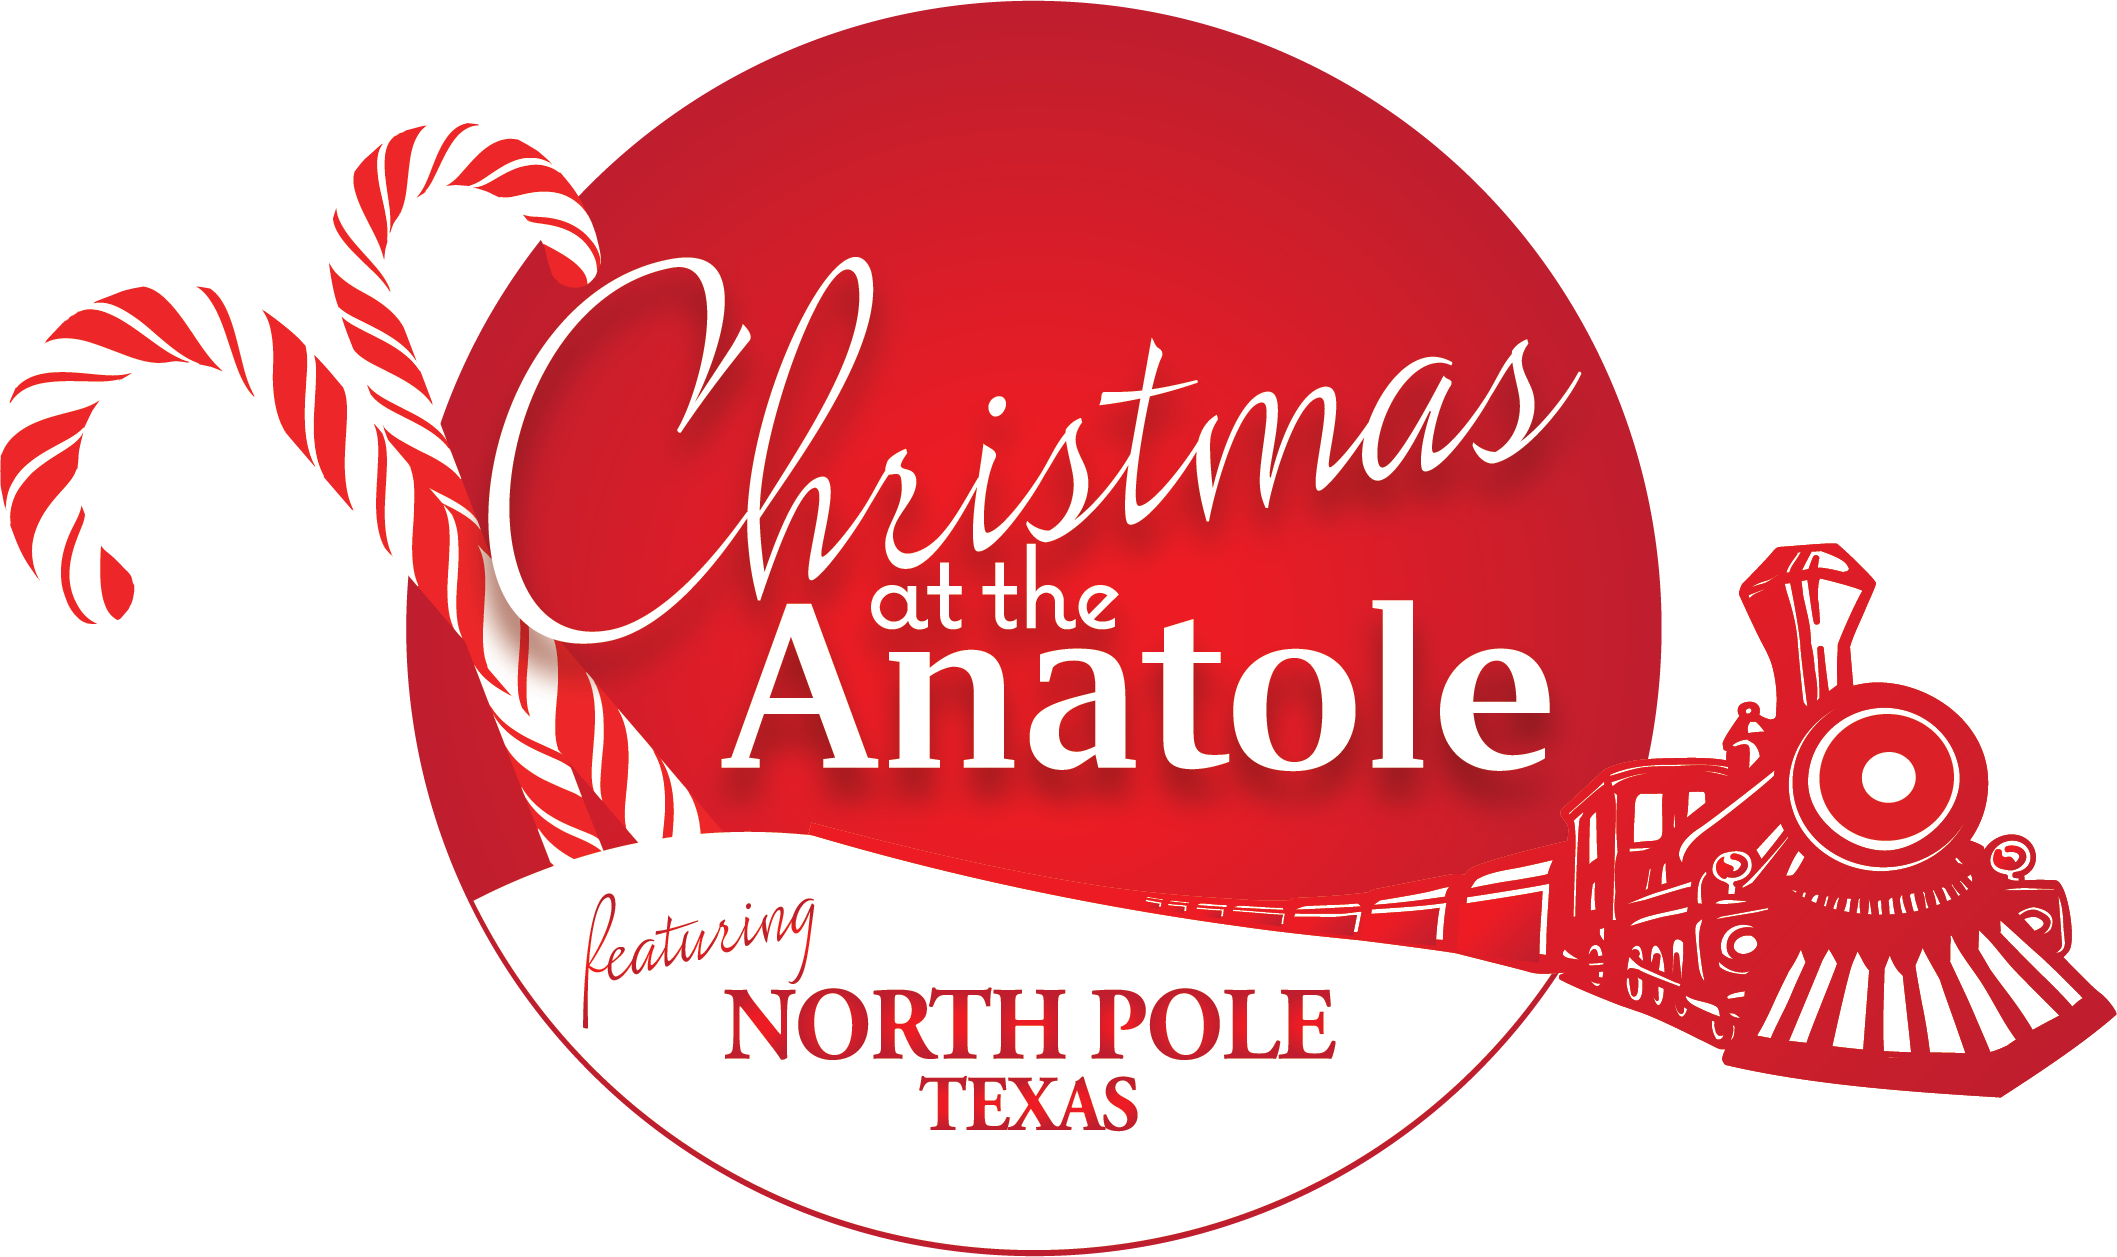 Christmas at Anatole featuring North Pole Texas